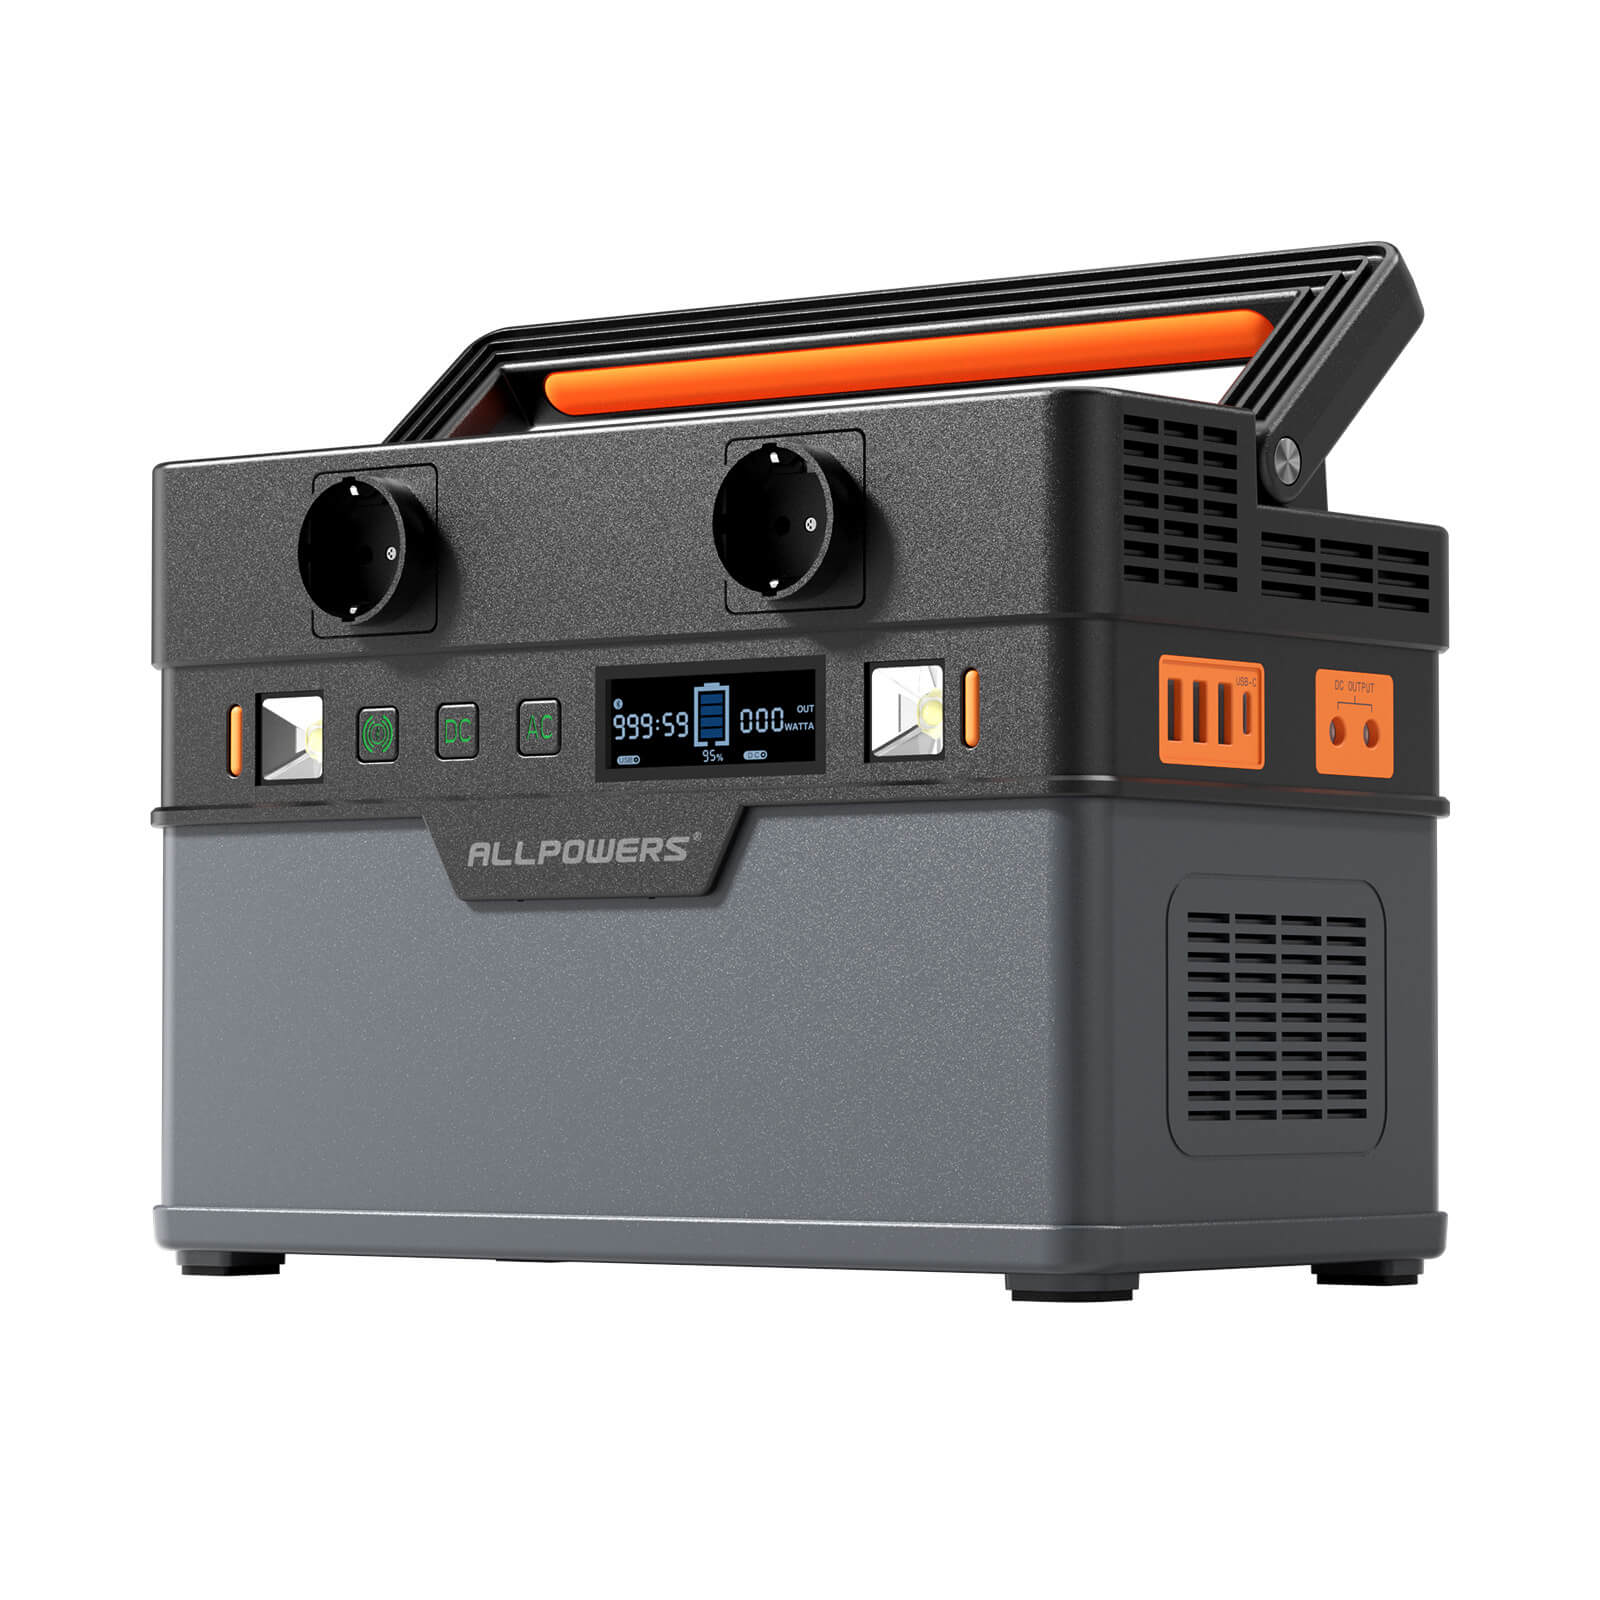 ALLPOWERS S700 Tragbares Powerstation | 700W 606Wh